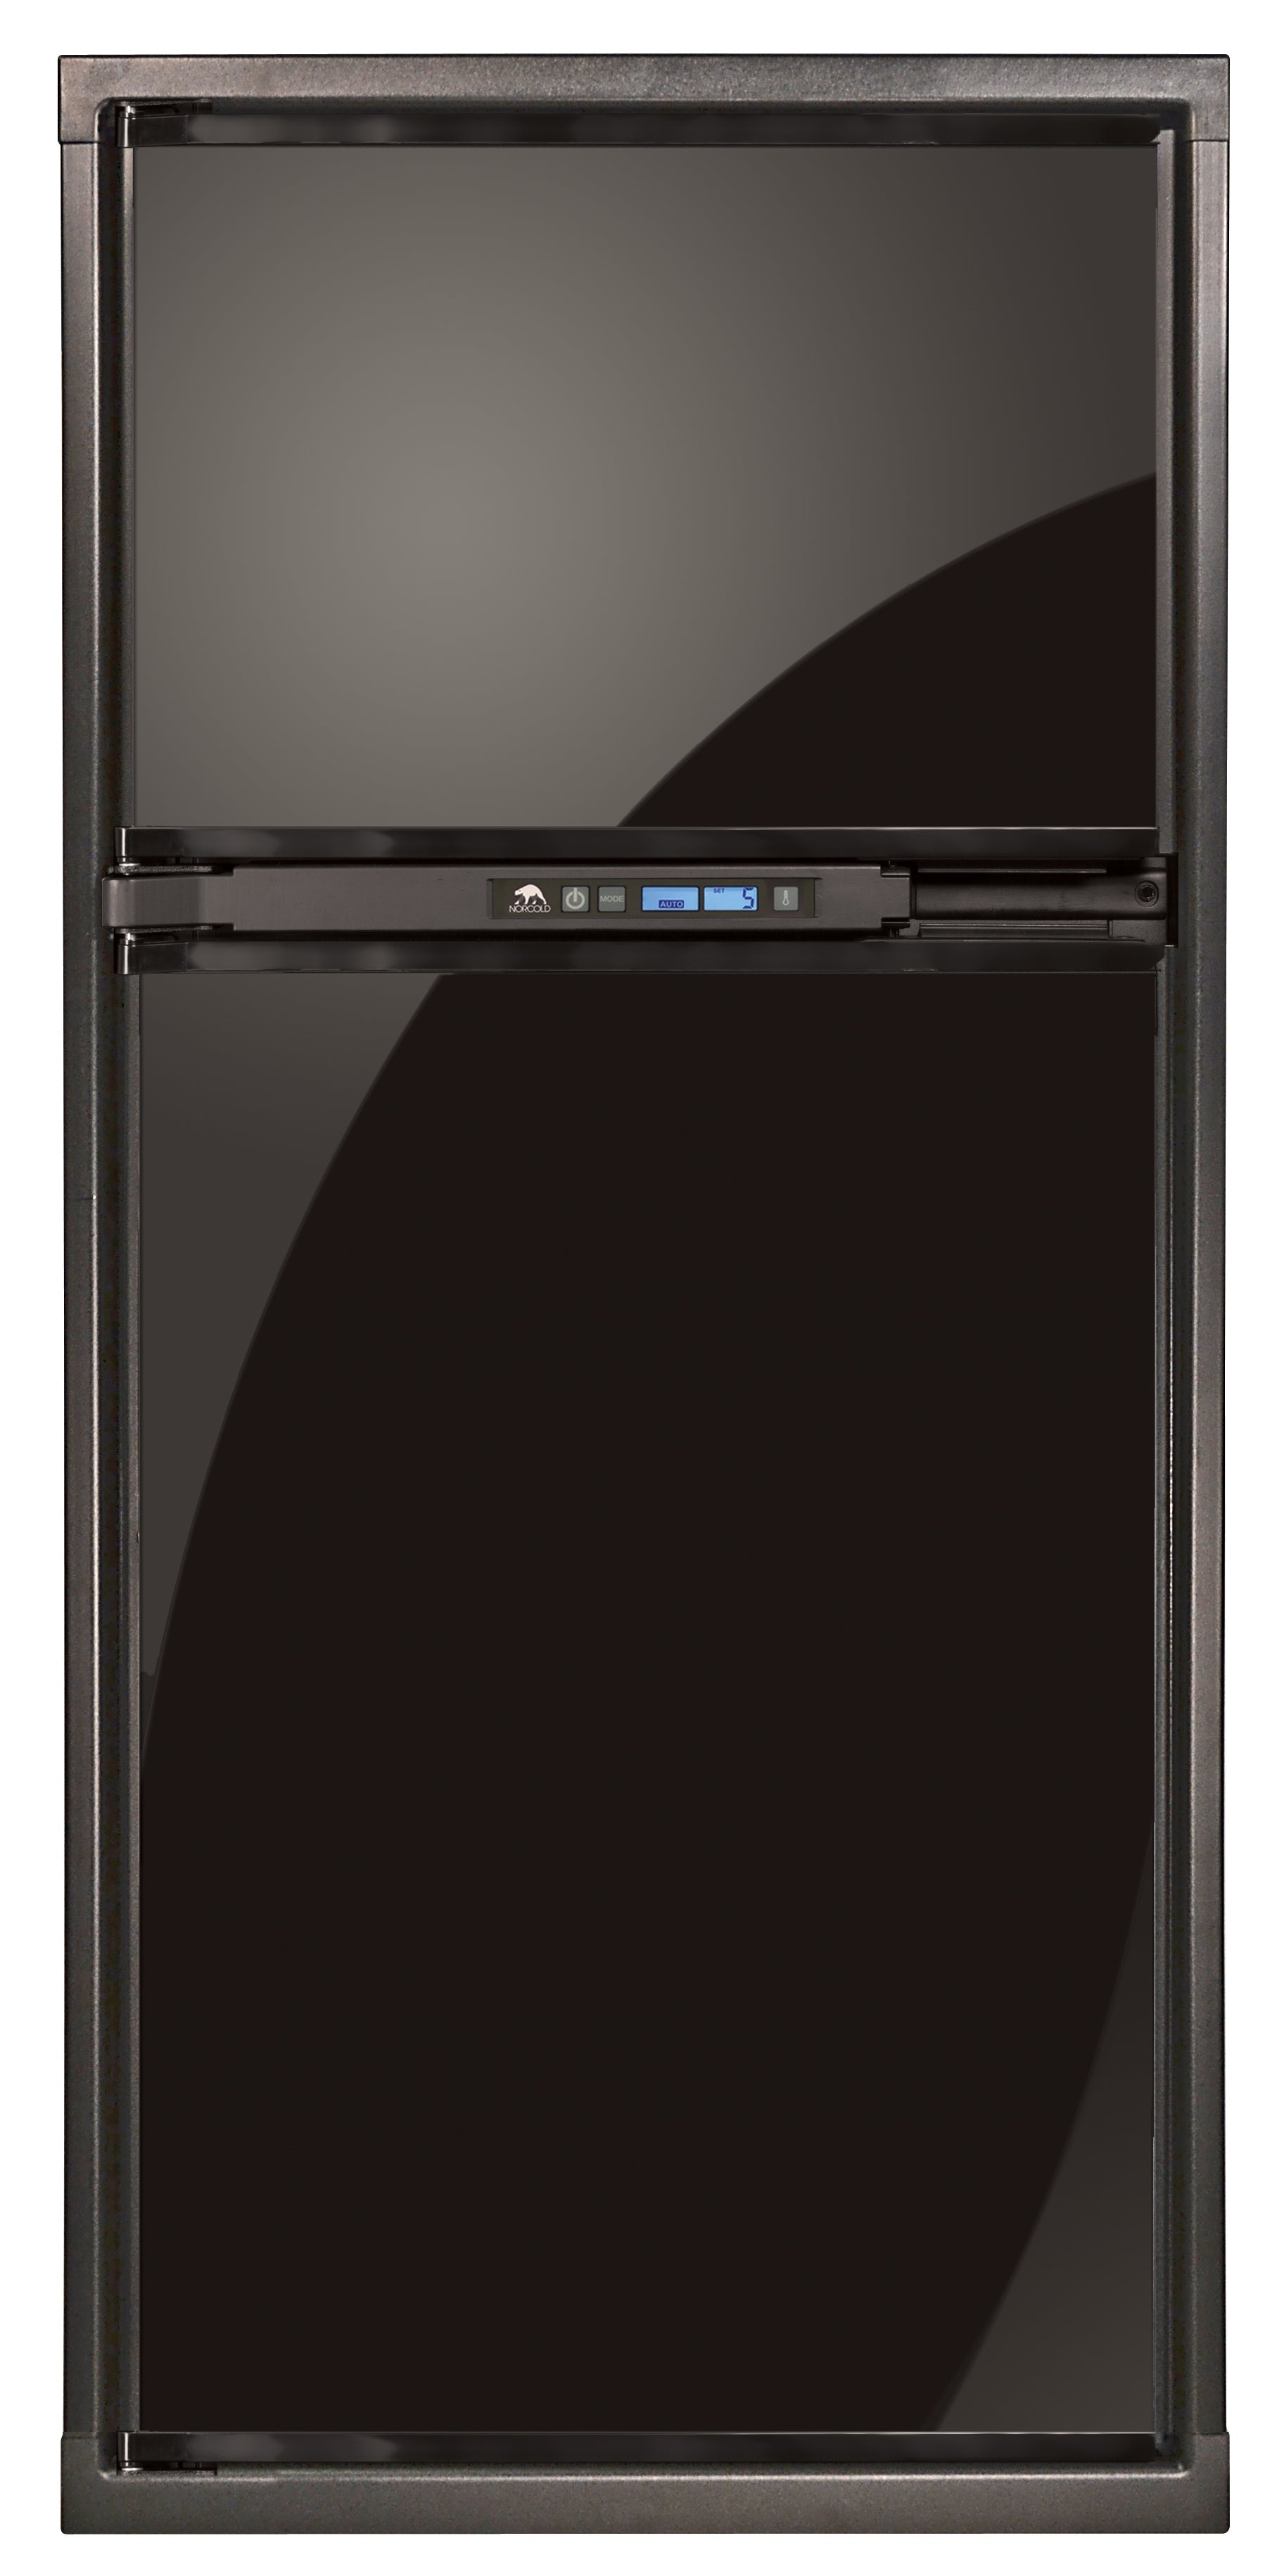 Norcold NA7LX.3R Dual Compartment 2 Door Refrigerator With Freezer - N6DNA7LX3R